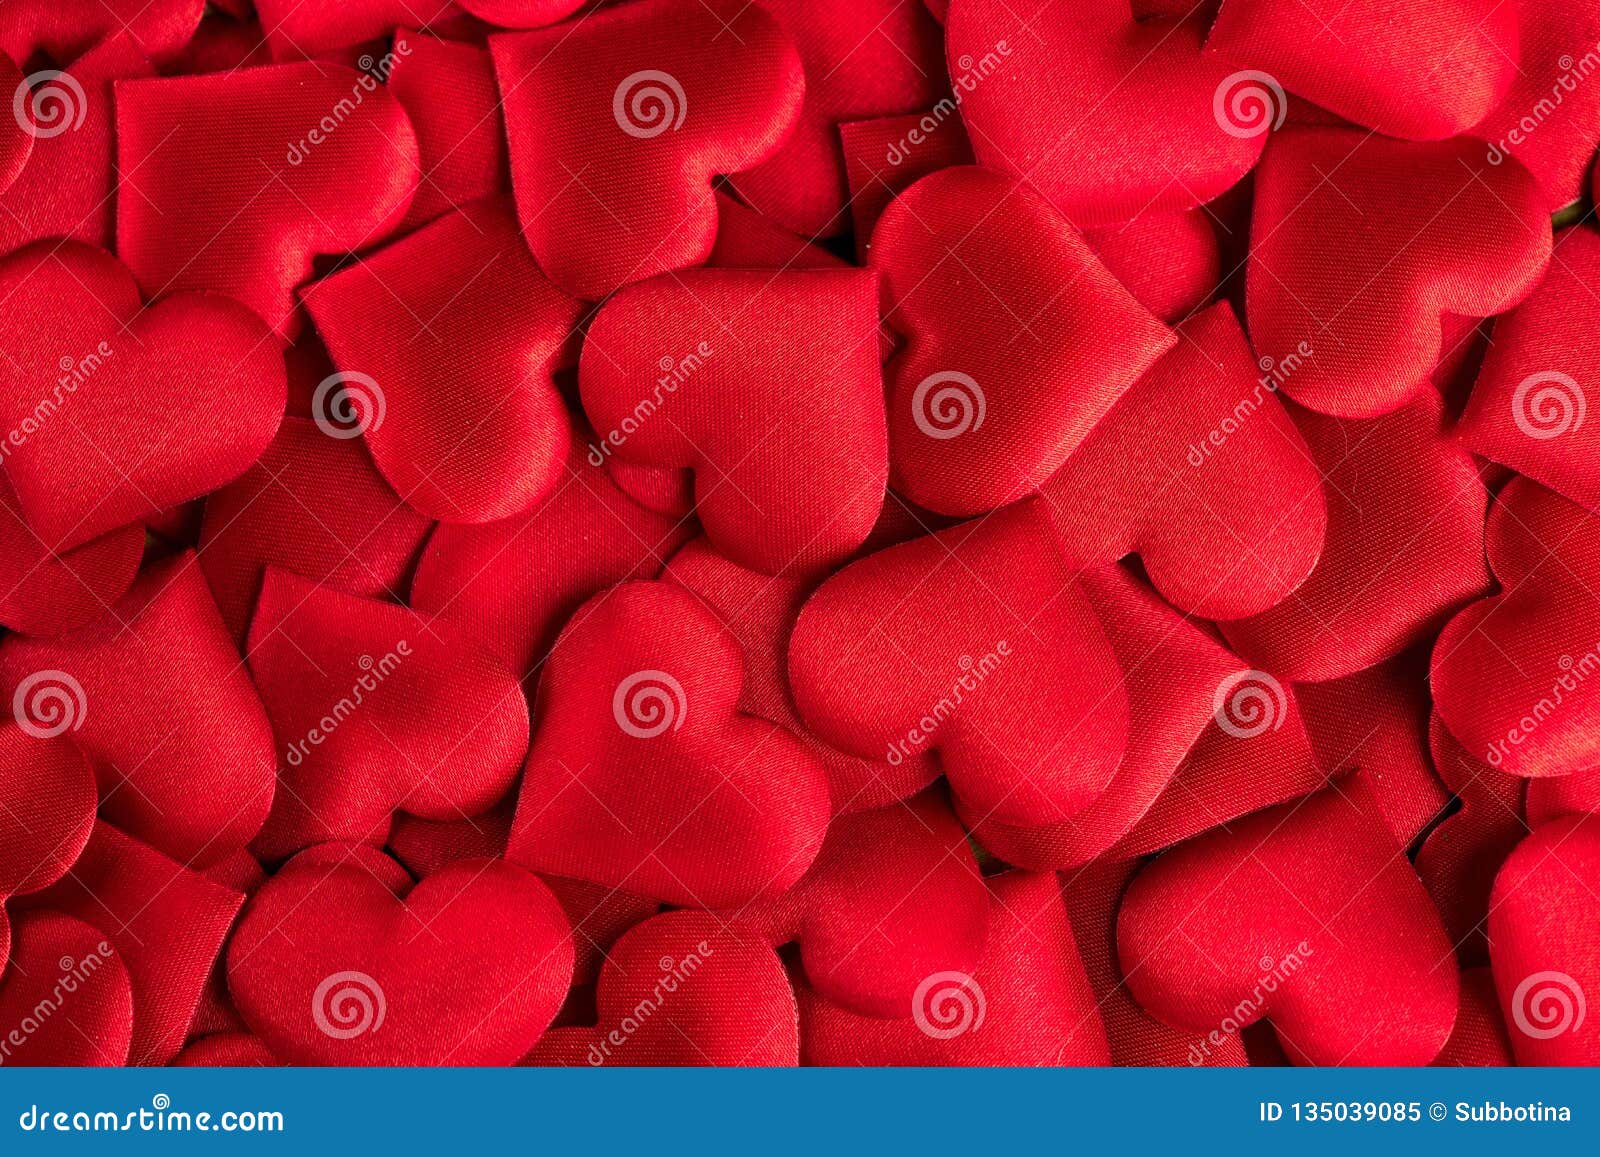 valentine`s day. red heart  backdrop. abstract holiday valentine background with red satin hearts. love